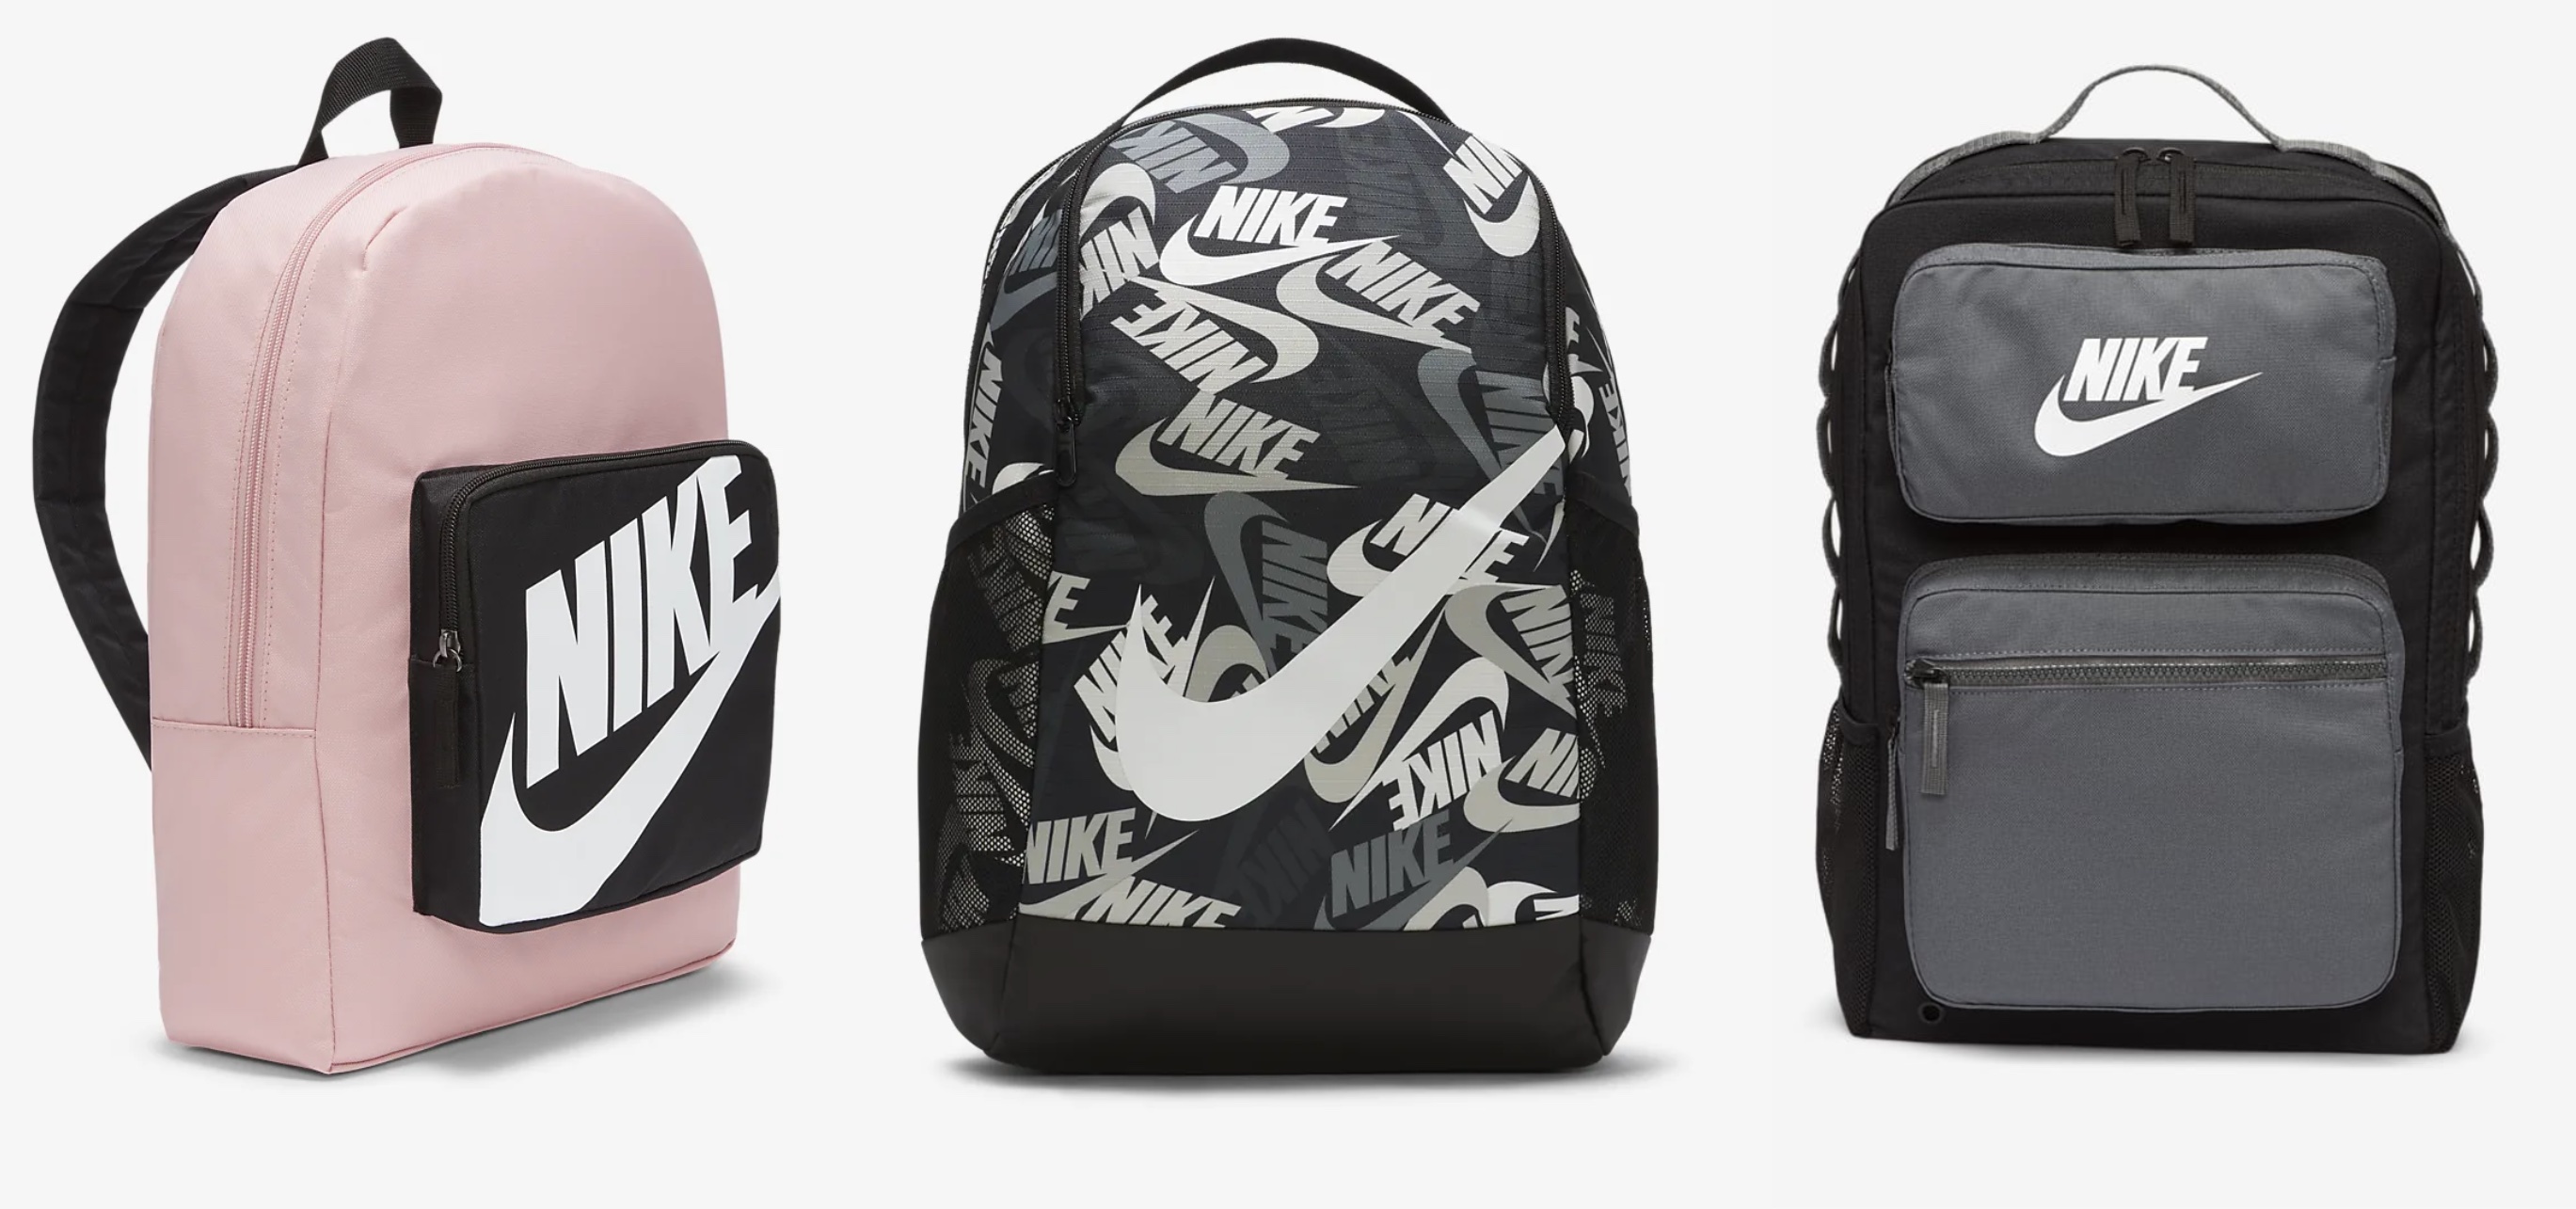 Heres how to properly wear your backpack! #backpack #backtoschool #bac, nike elite backpack